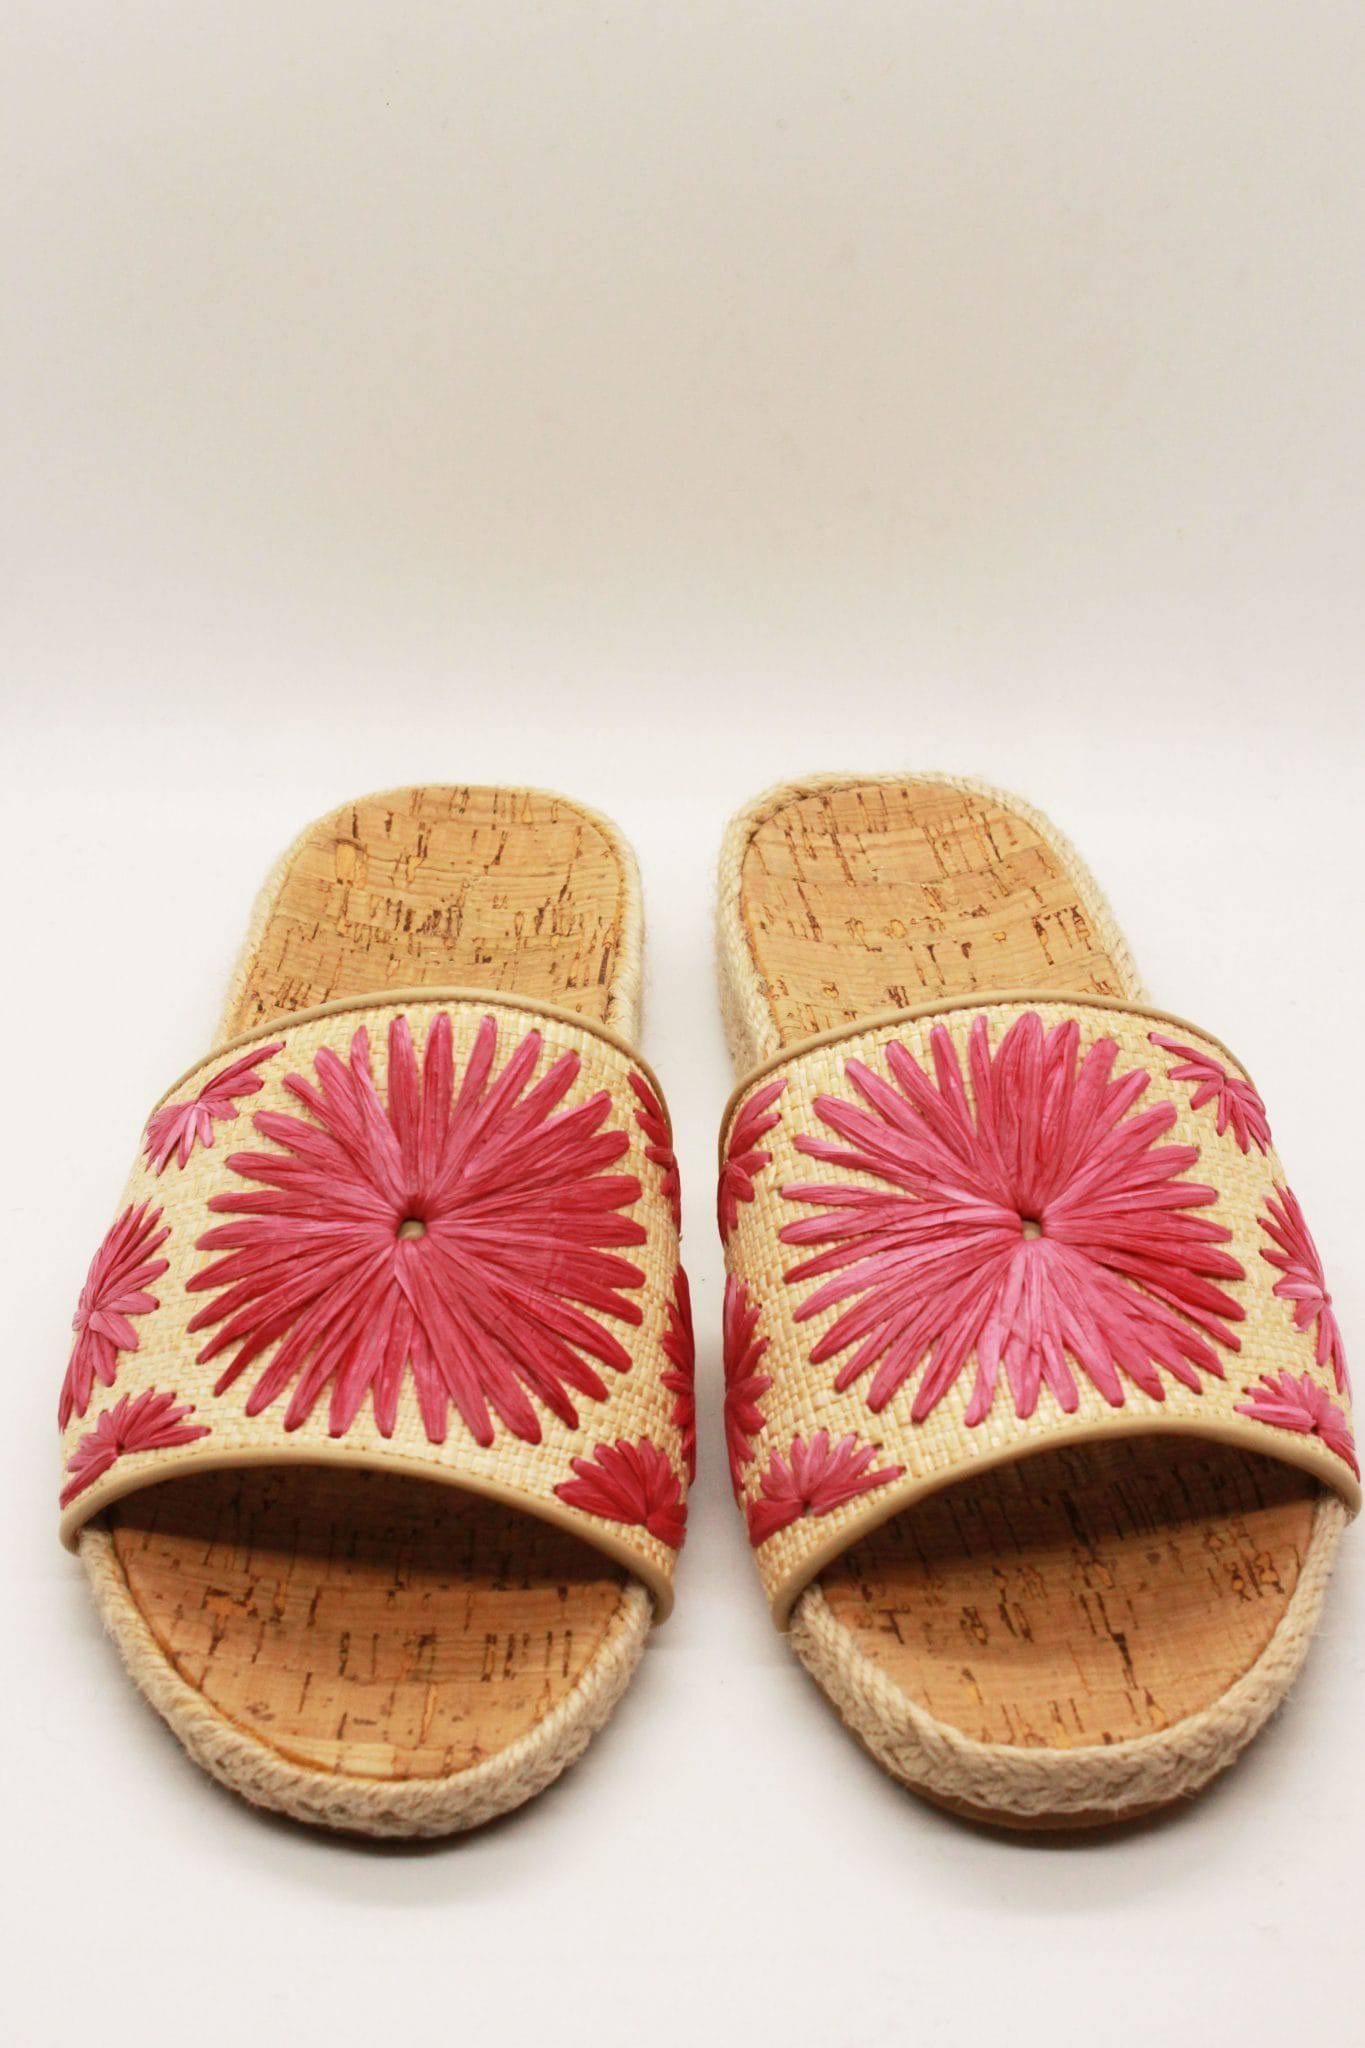  braided jute cork sole slides by Jack Rogers with pink hand woven rondelle flowers.